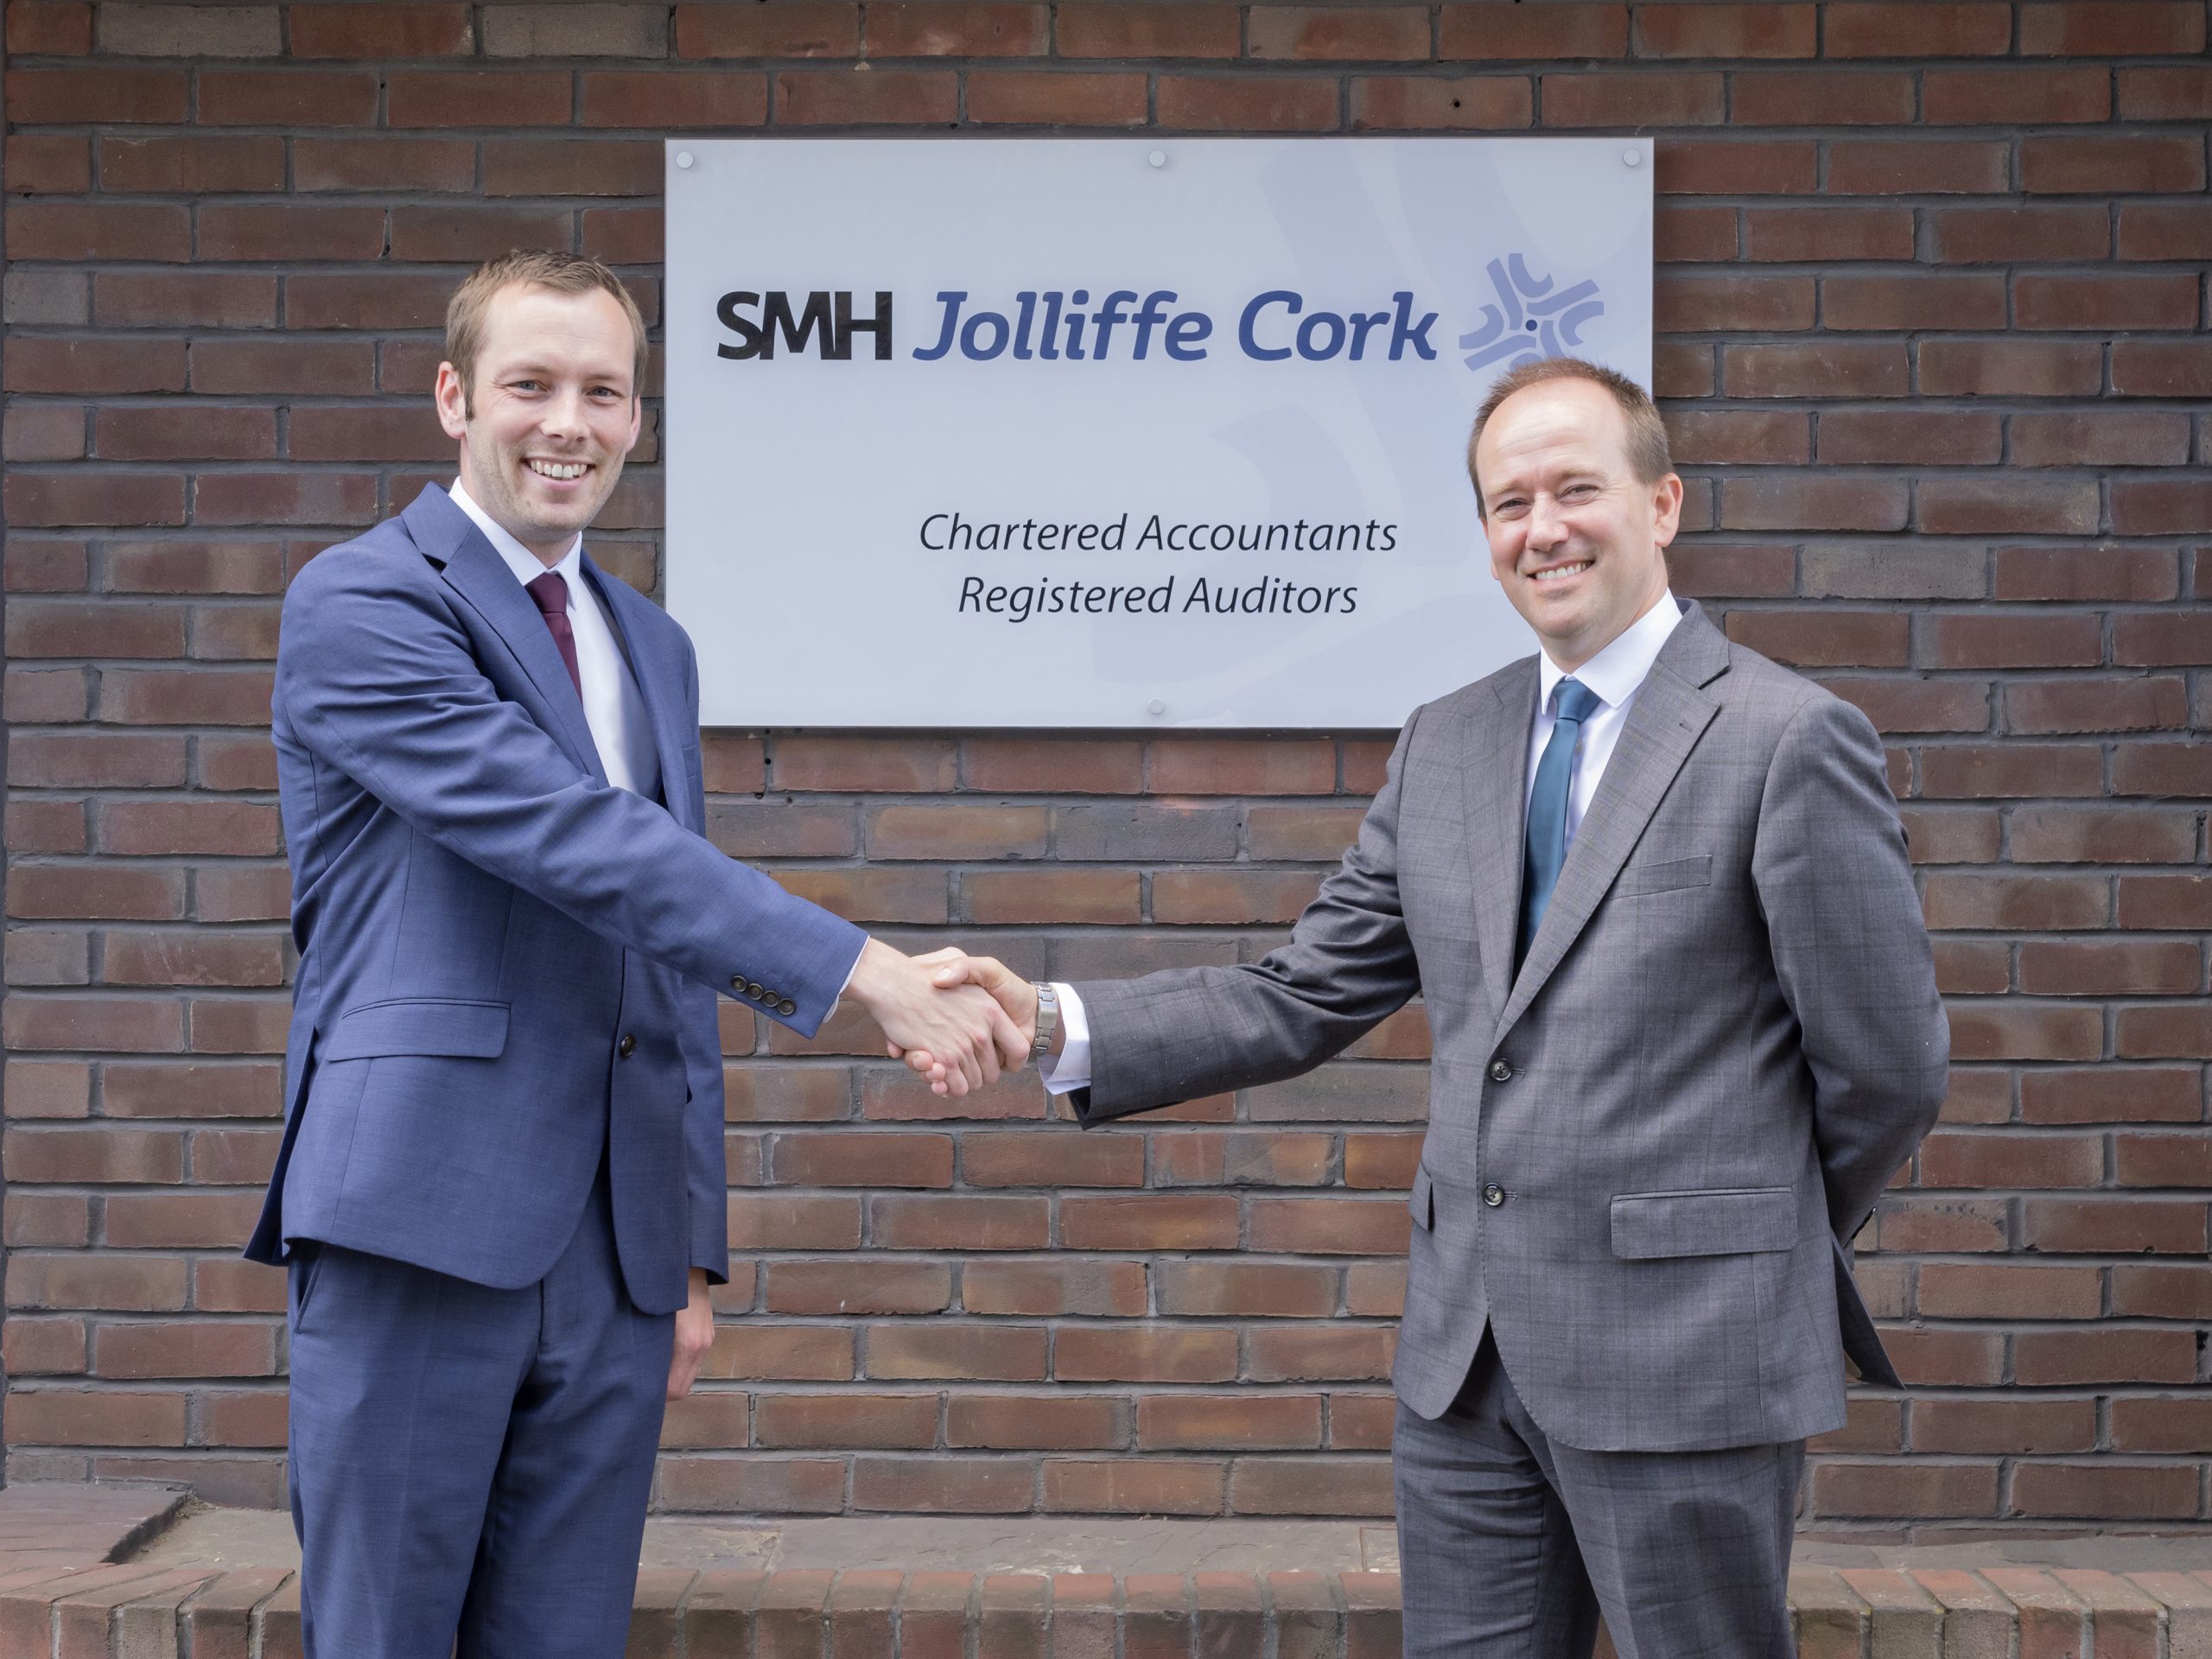 SMH Jolliffe Cork adds new Financial Services division